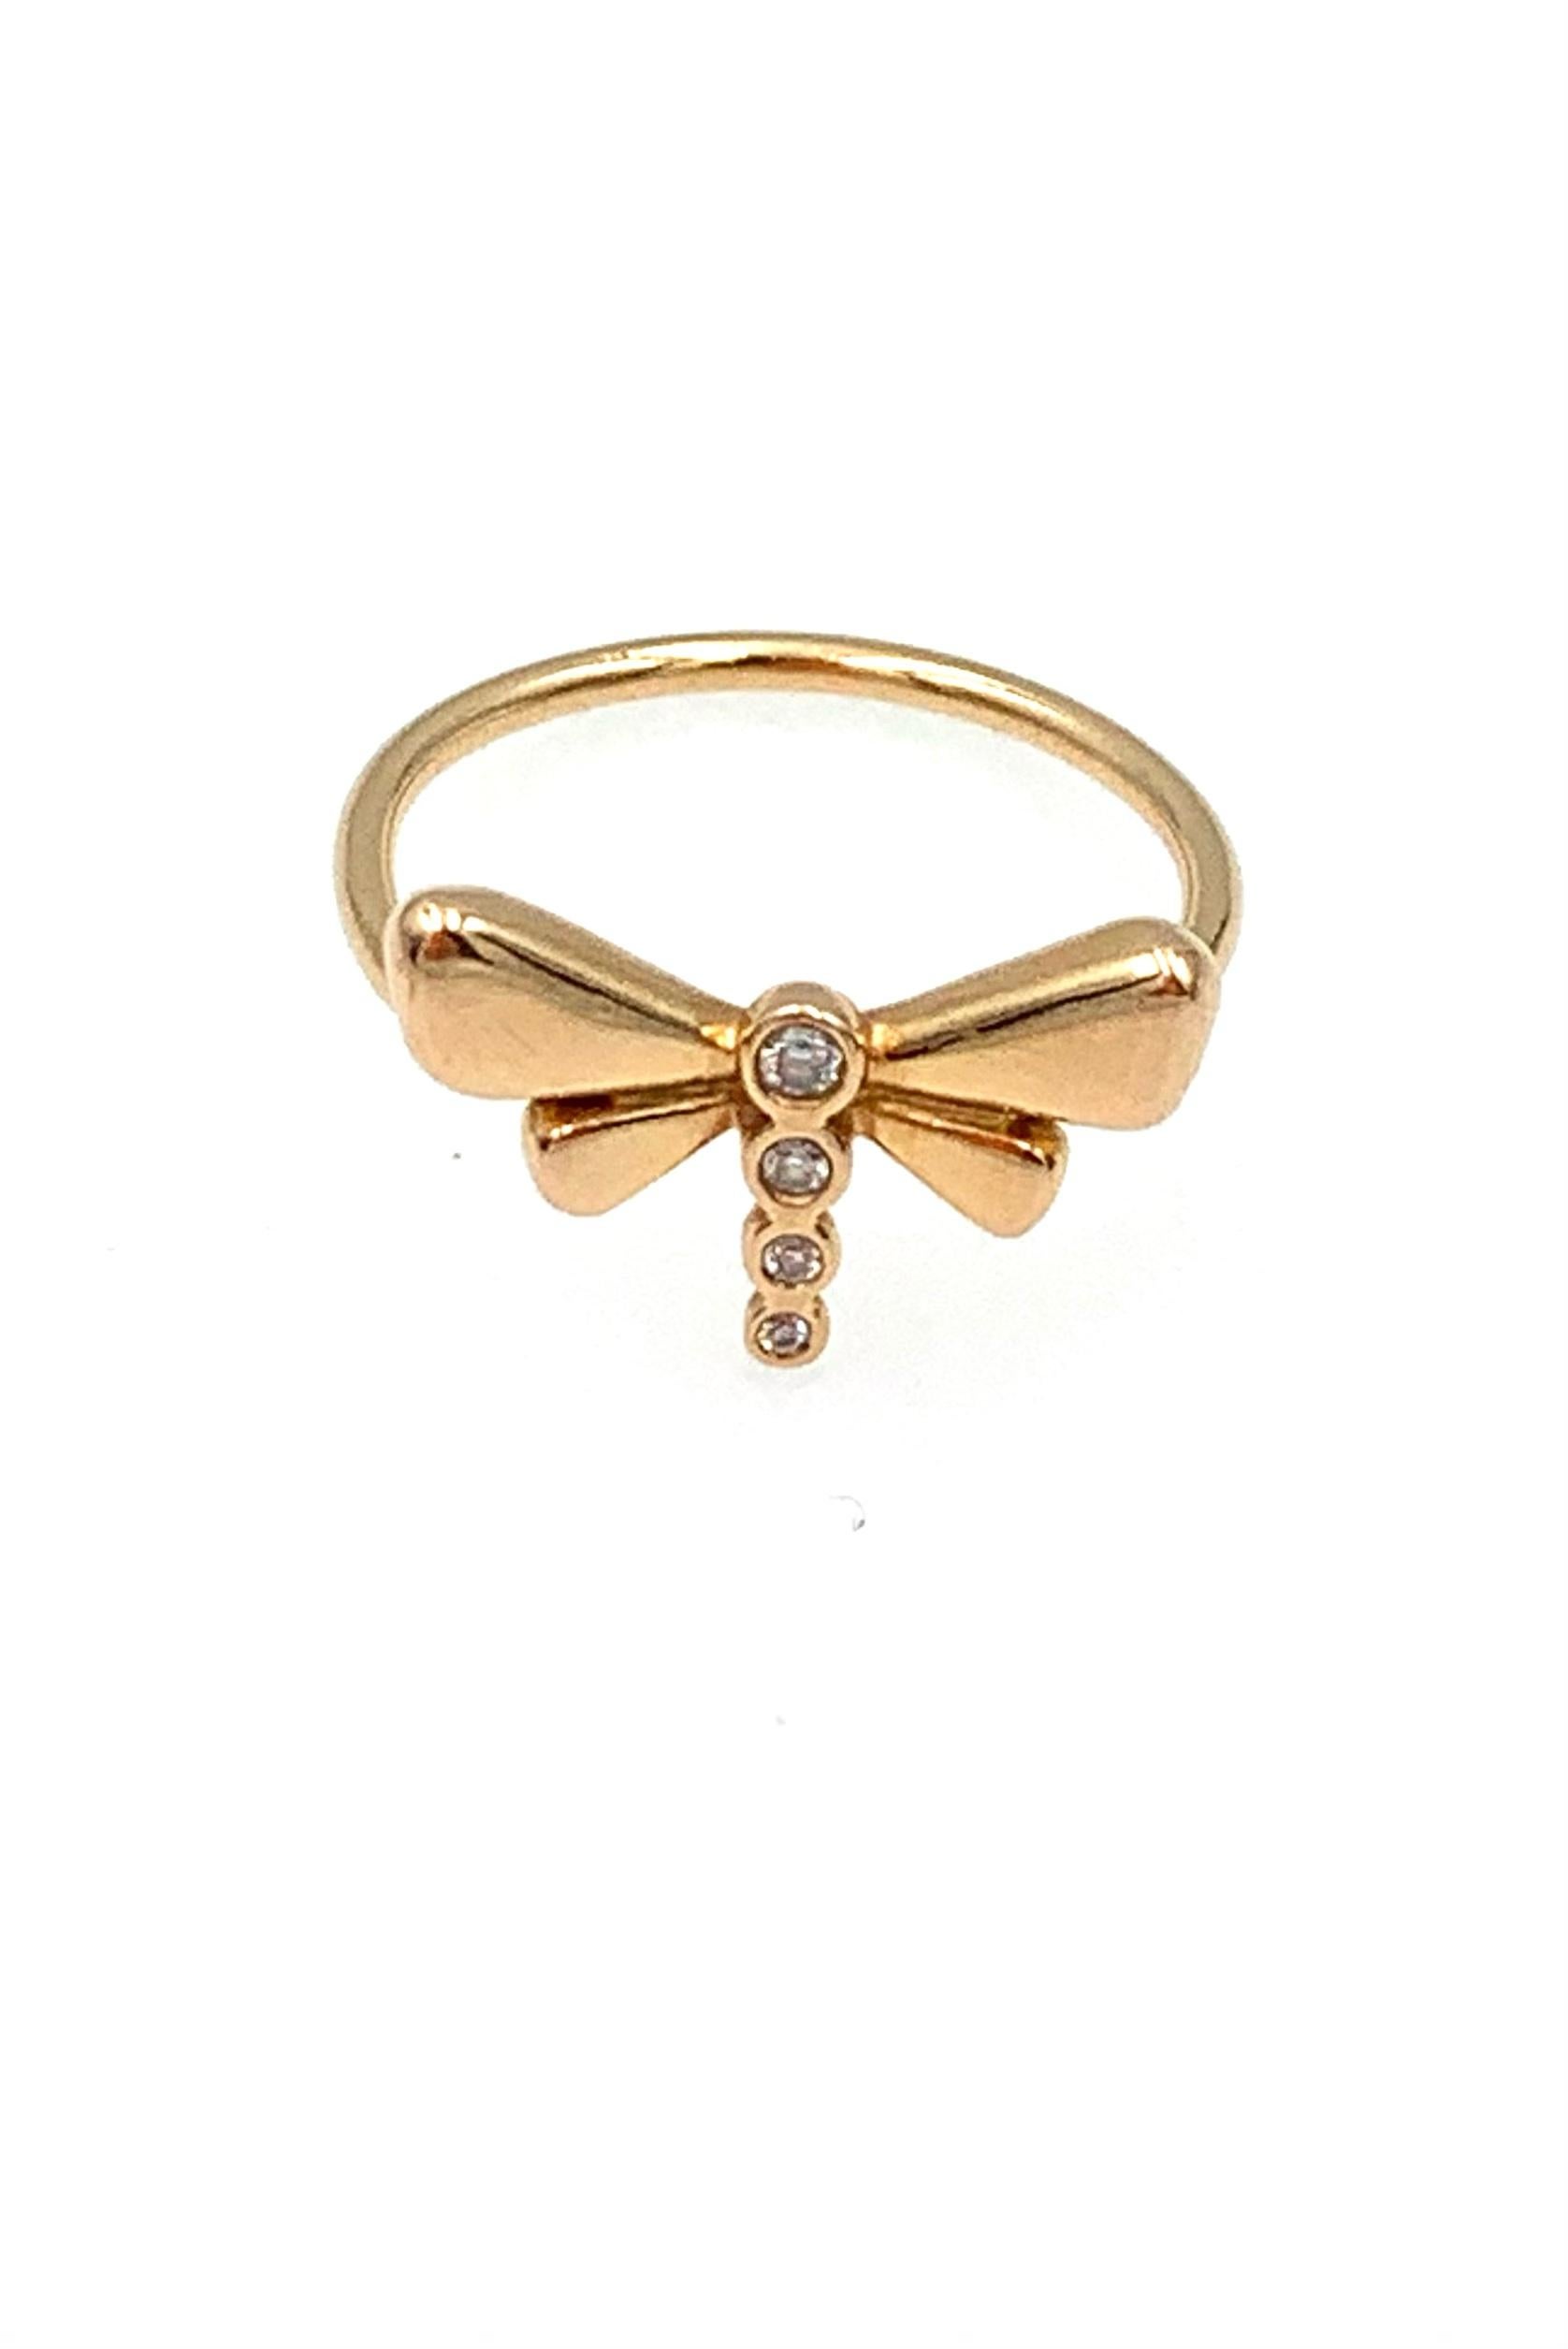 Hand made in 9 karat Rose gold this dainty little ring has 4 Diamonds making up the body of the Dragonfly which weight at approximately .11 carats all together. This is part of our Princess Collection our made to order designs, bespoke to our